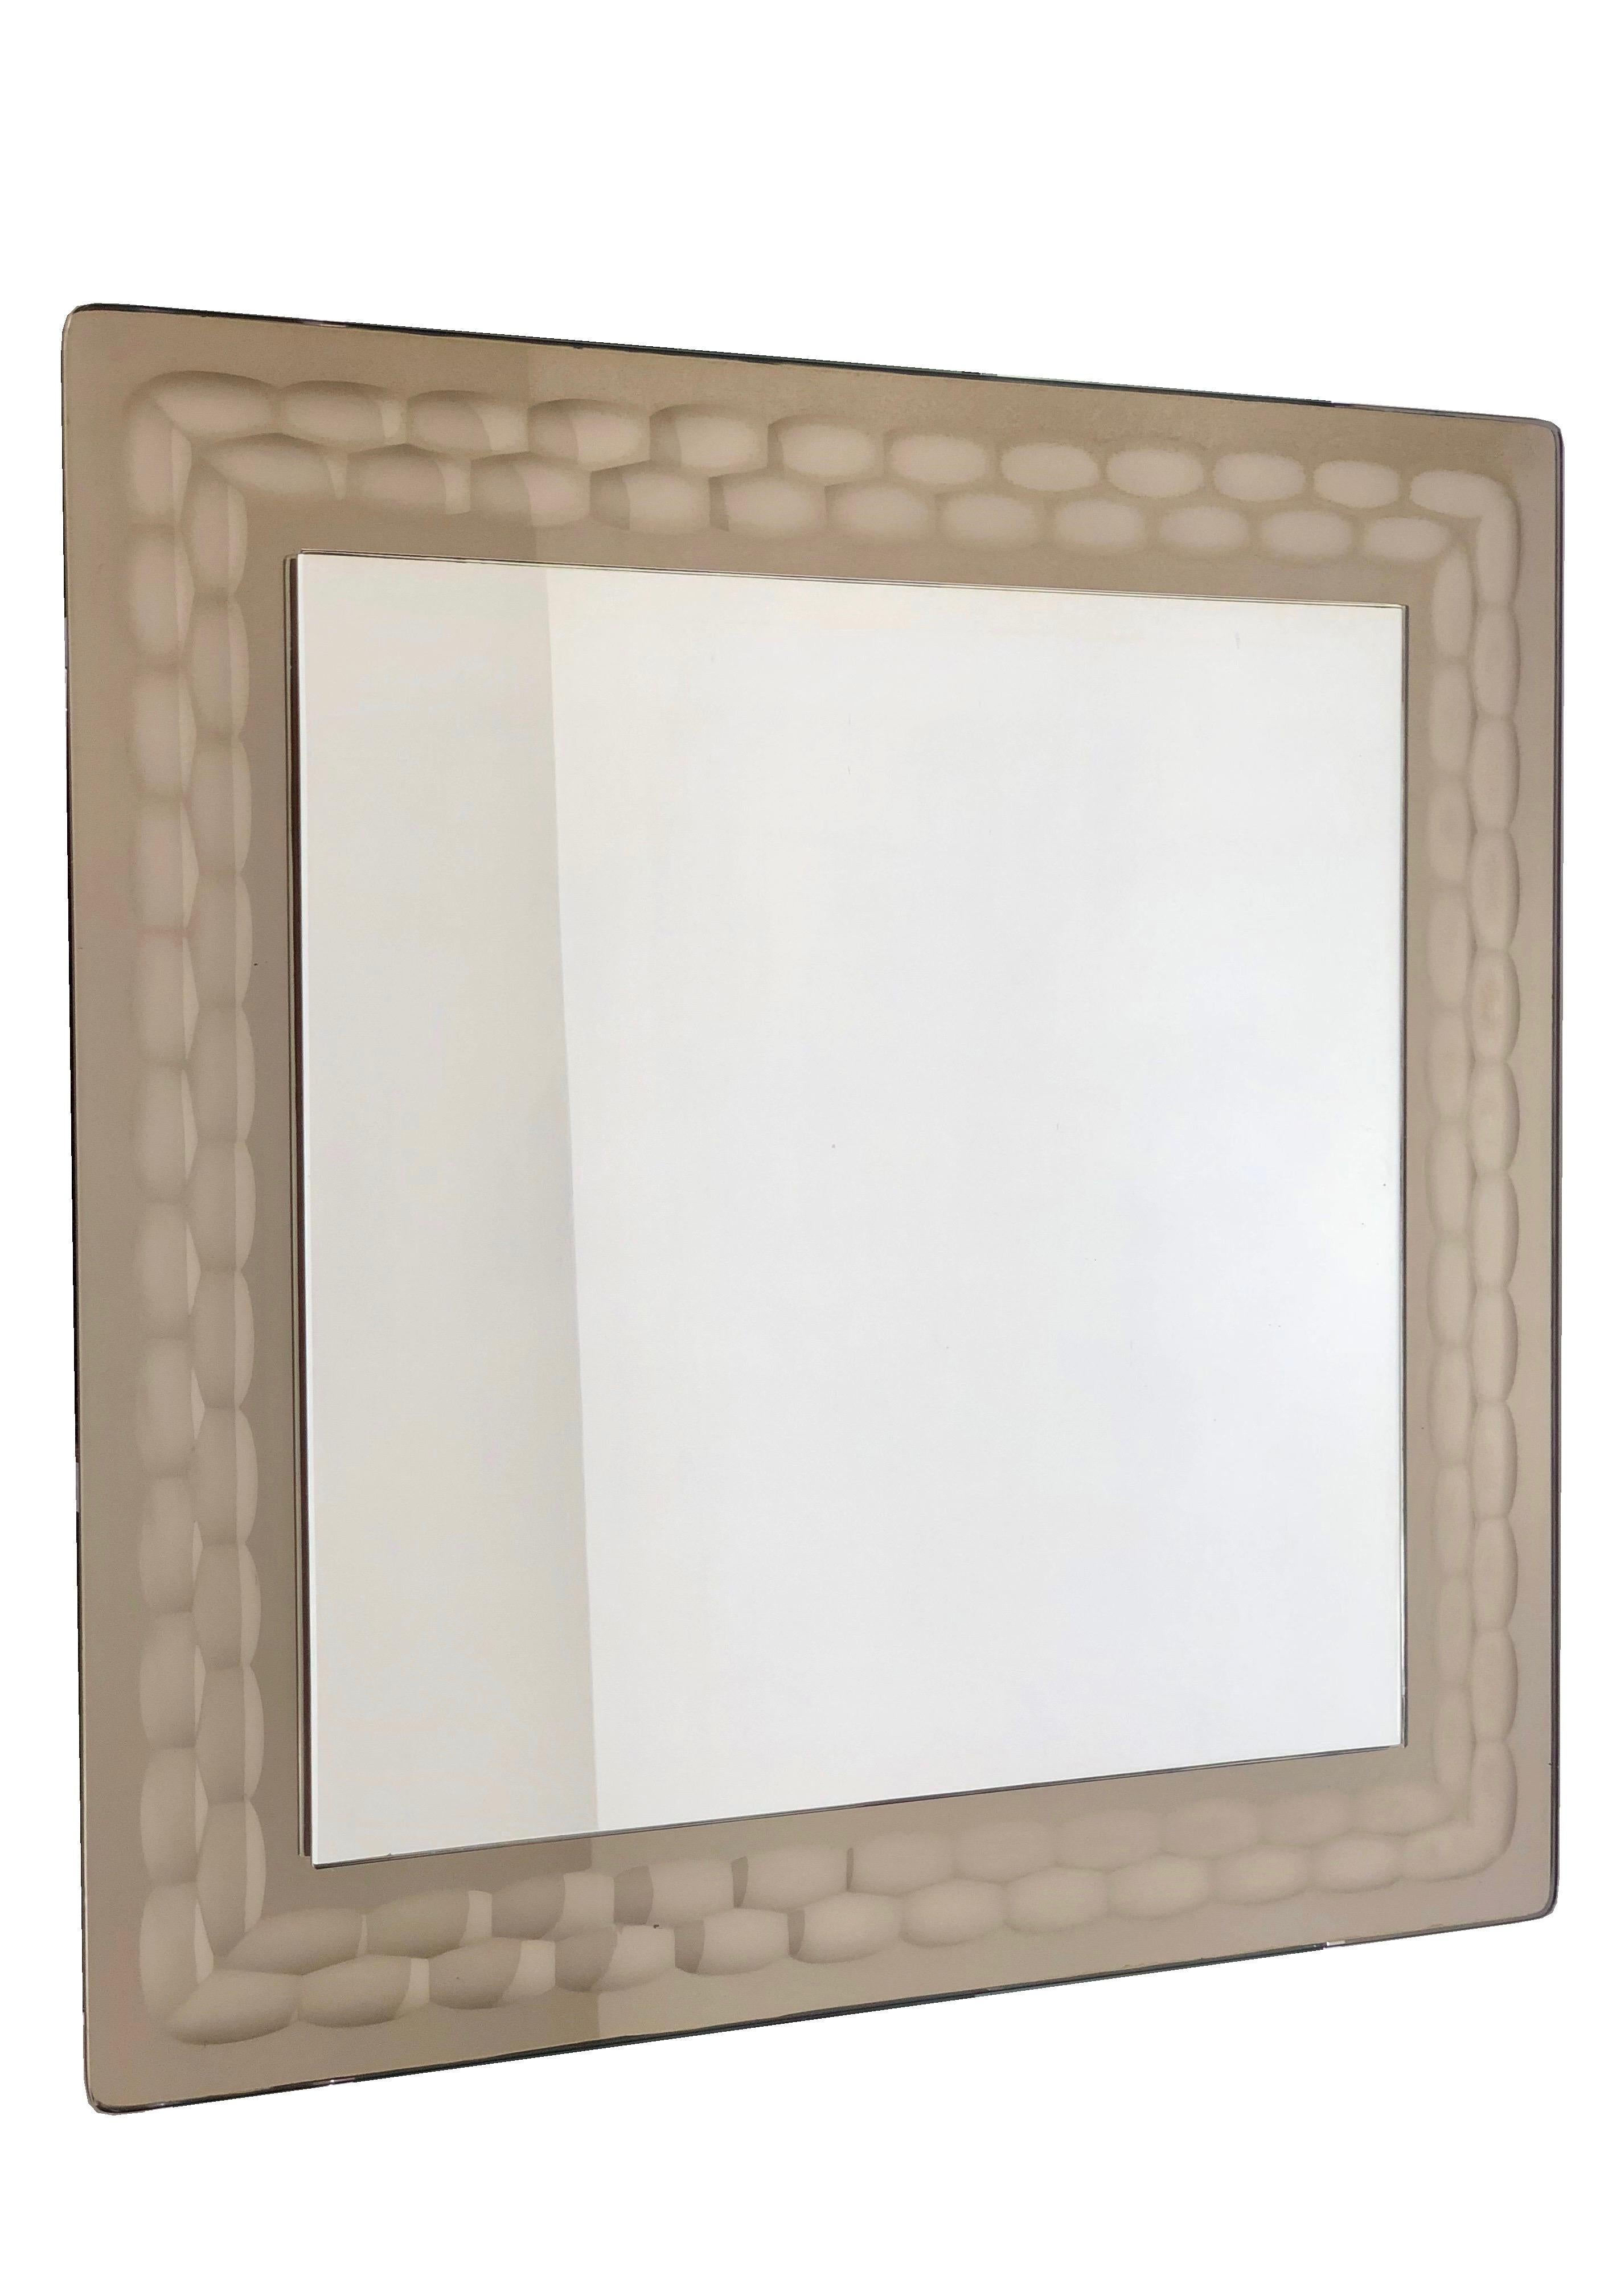 Square wall mirror by the Italian designer Antonio Lupi for crystal Luxor - Italy circa 1960. 

Its original label can be seen on the back.